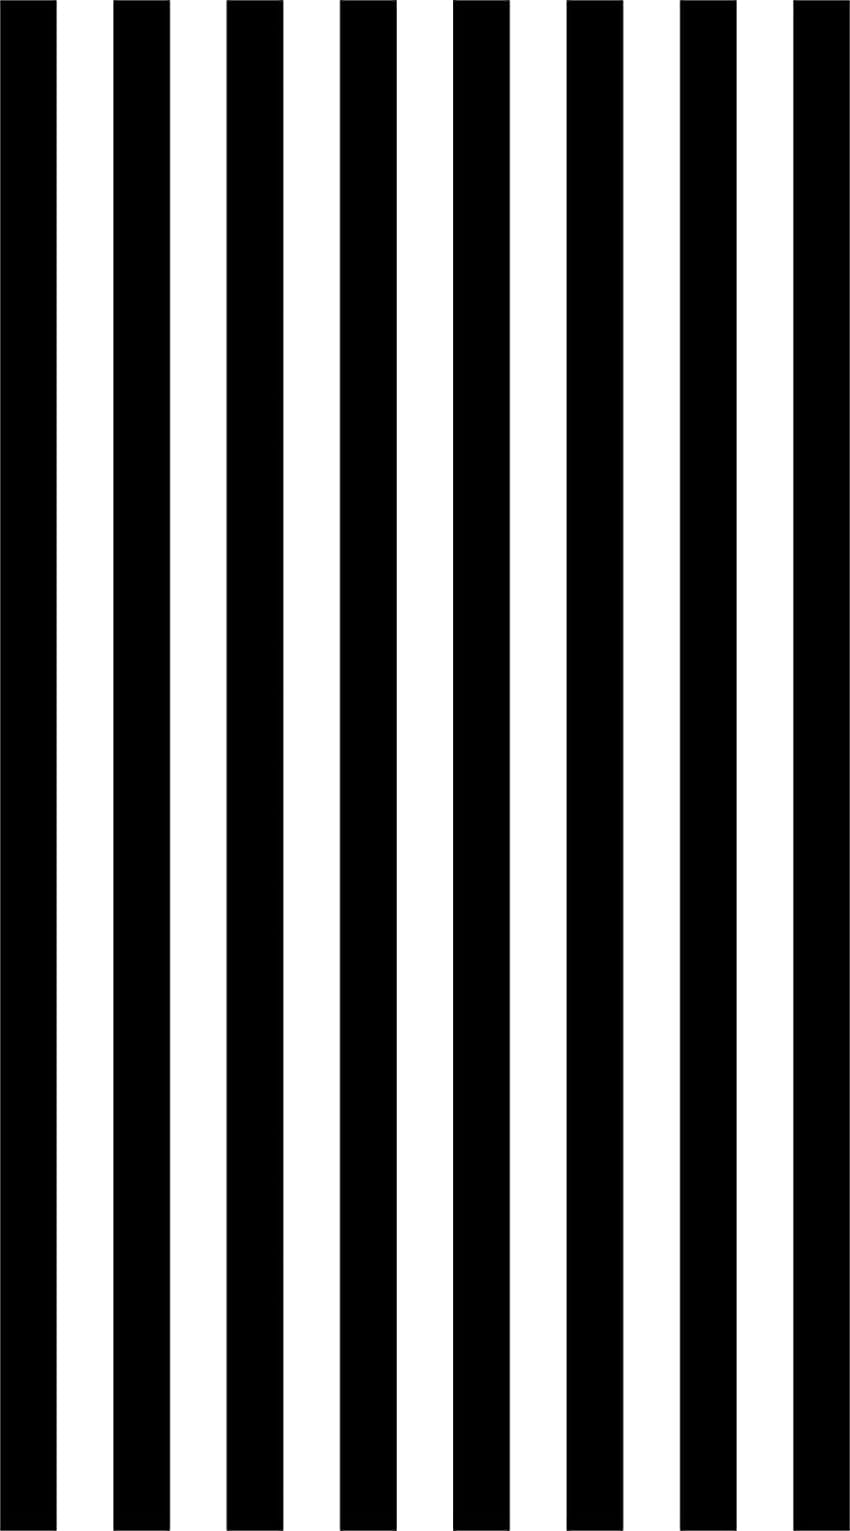 Amazon : 8x15ft Laeacco Black and White Stripes Backdrop for graphy Striped Backgrounds Wedding Ceremony Birtay Party Decorations Backdrops : Electronics วอลล์เปเปอร์โทรศัพท์ HD